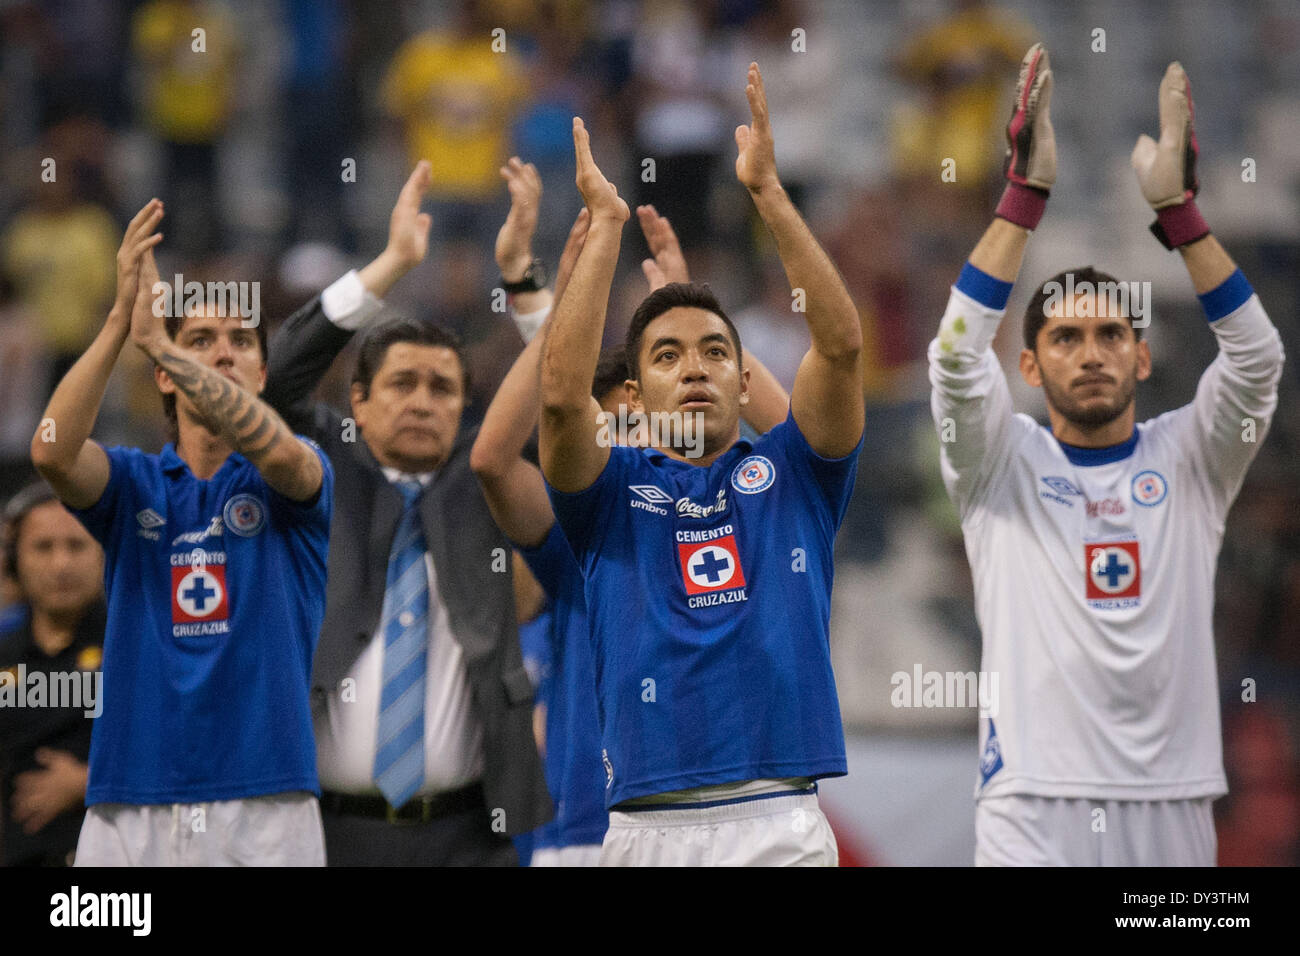 Mexico City, Mexico. 5th Apr, 2014. Cruz Azul players gesture after the match of the Liga MX against America in the Azteca Stadium, in Mexico City, capital of Mexico, on April 5, 2014. © Pedro Mera/Xinhua/Alamy Live News Stock Photo